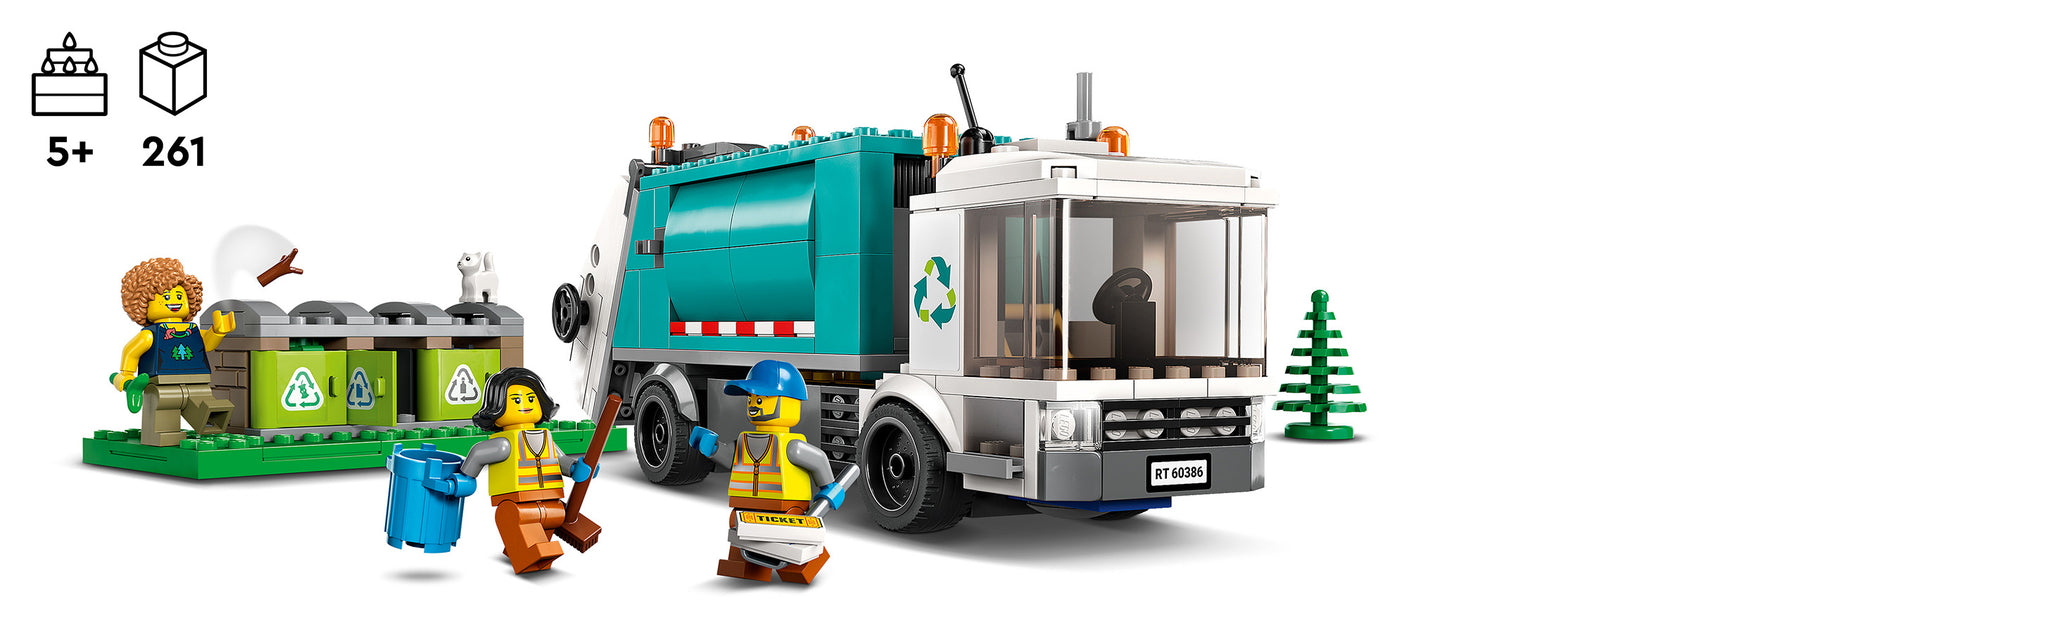 LEGO 60386 Recycle truck